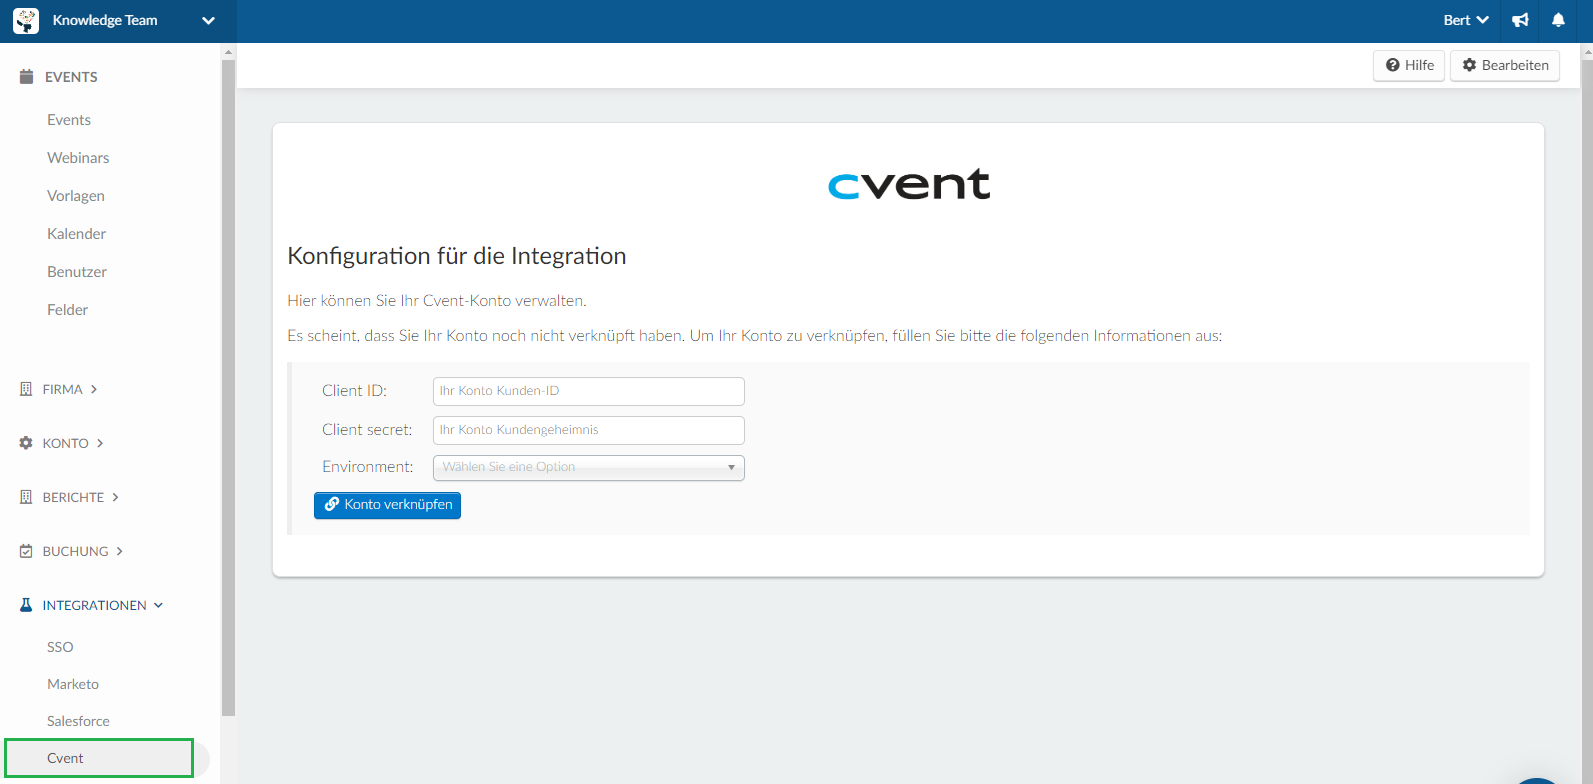 integrating Cvent at the company level